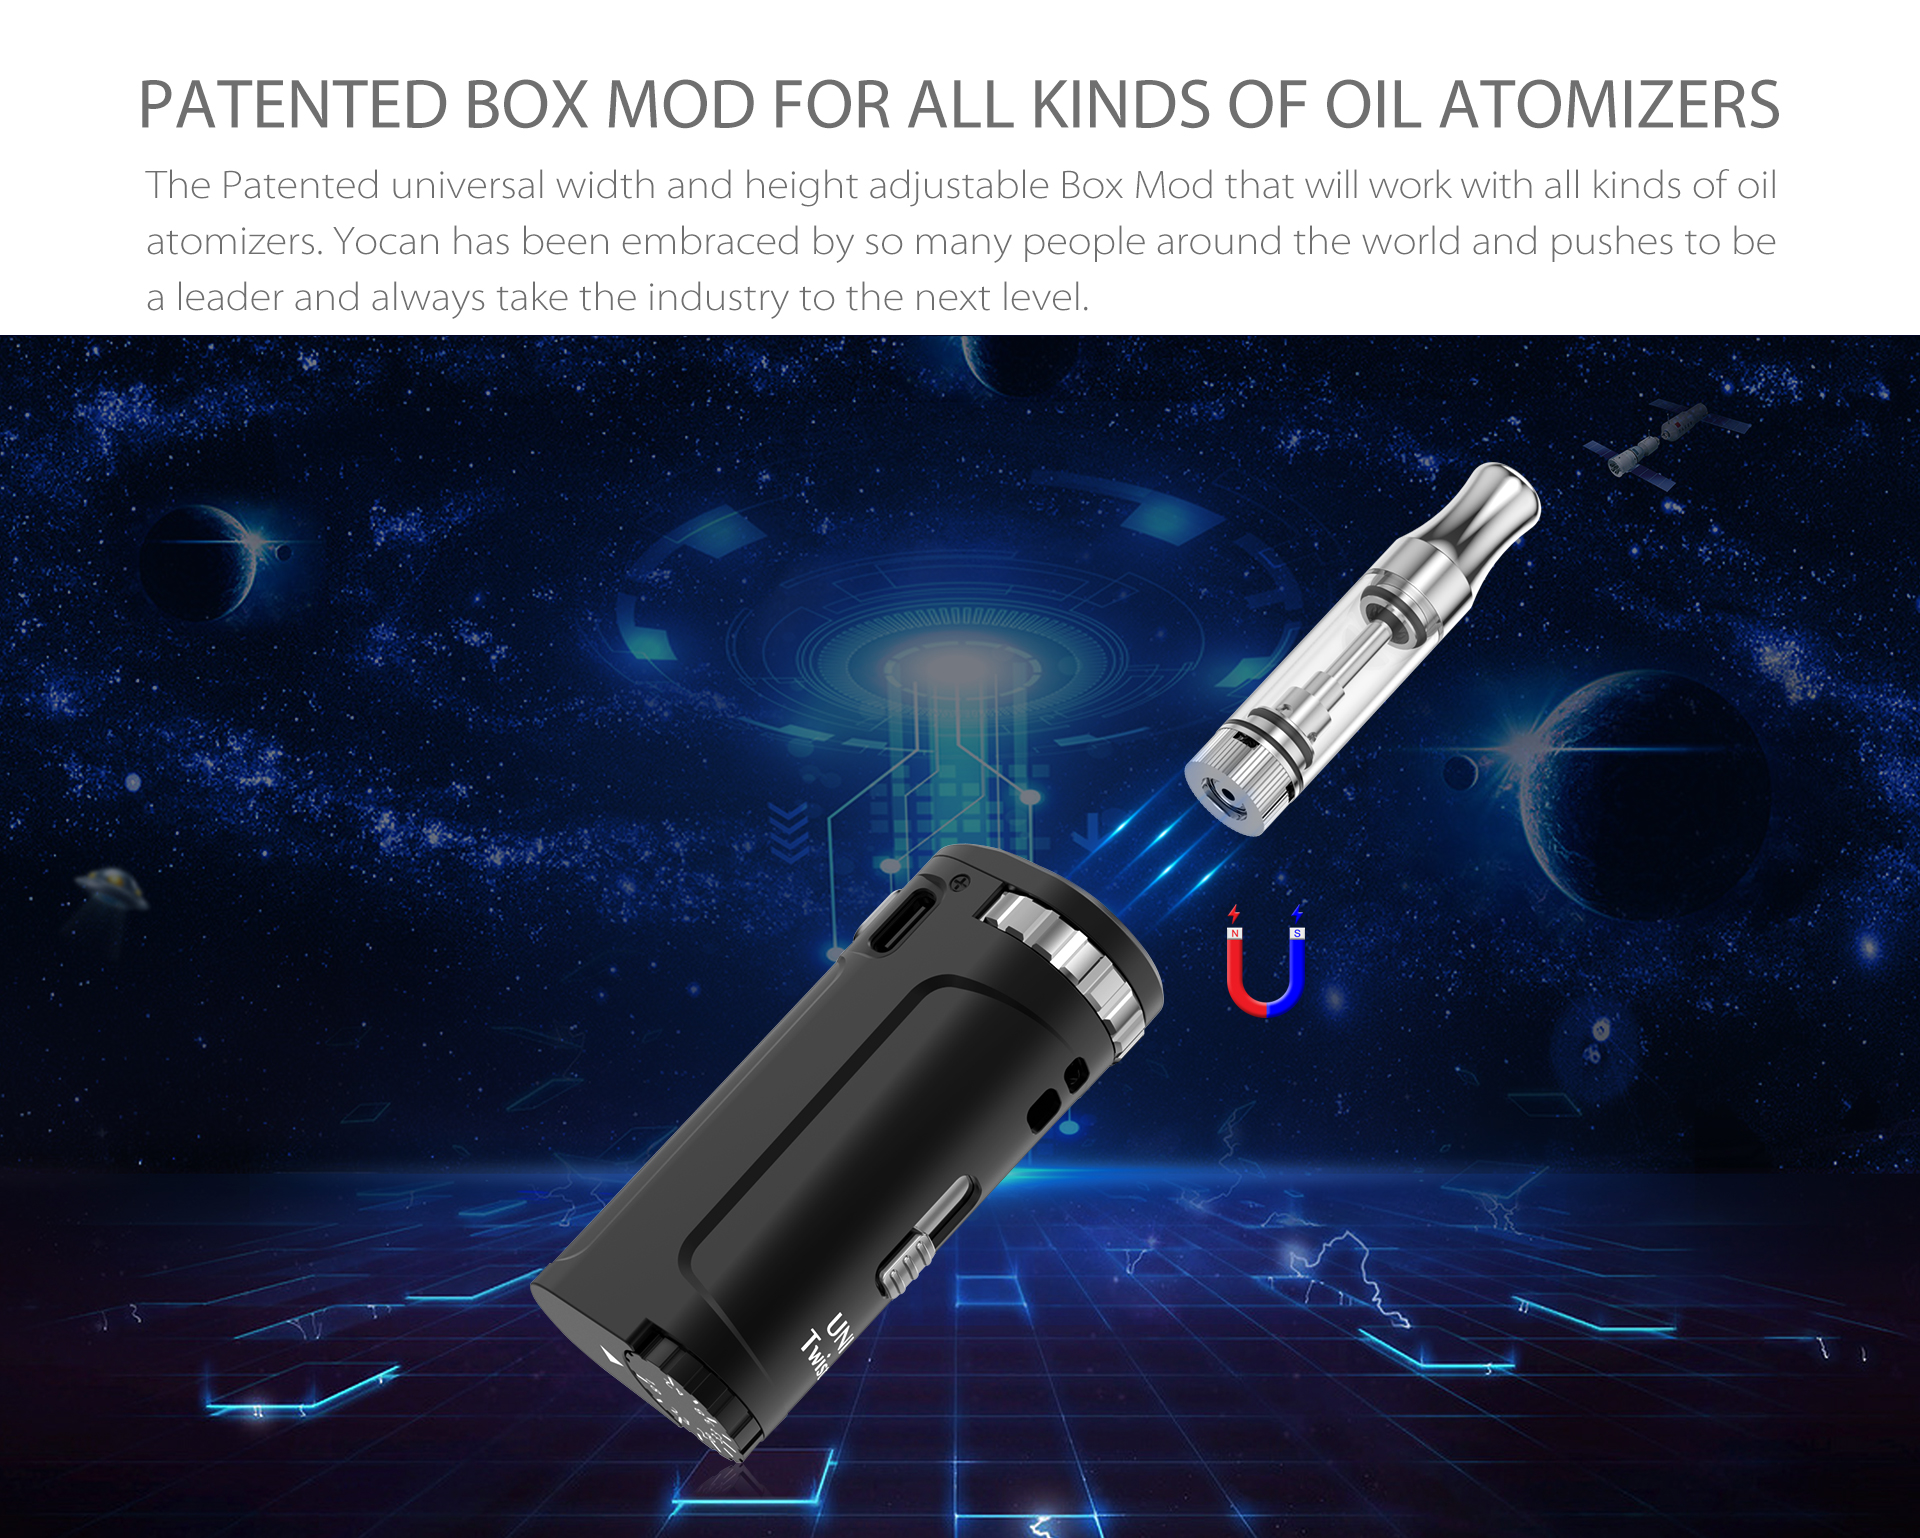 Yocan UNI Twist Universal Portable Mod is Patented Box Mod For ALL Kinds of Oil Atomizers